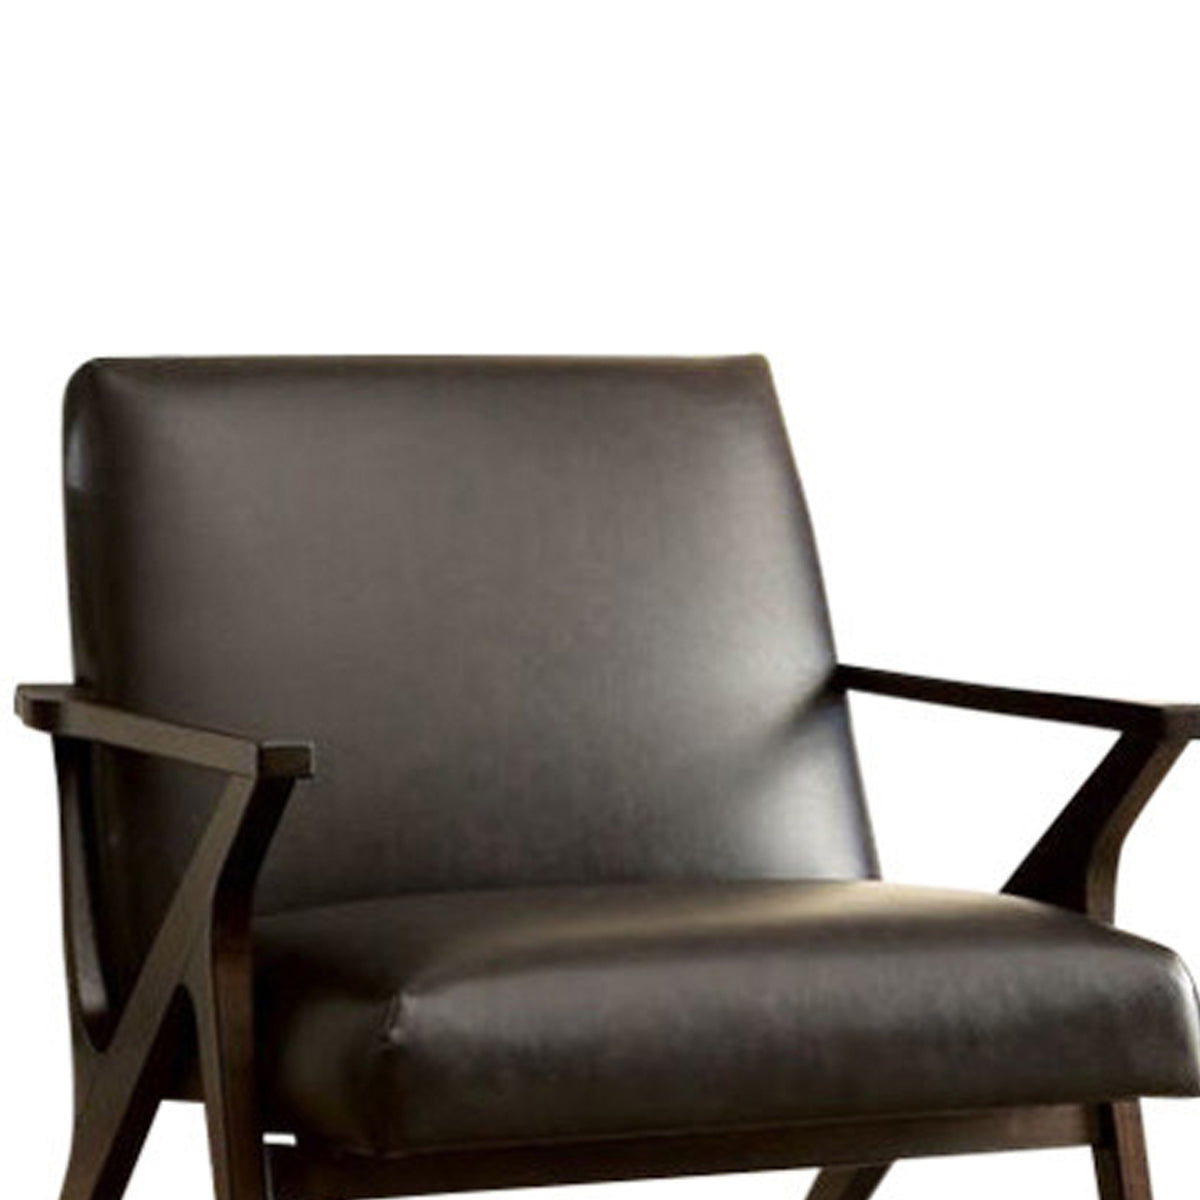 Dubois Contemporary Chair In Brown Finish - BM131425